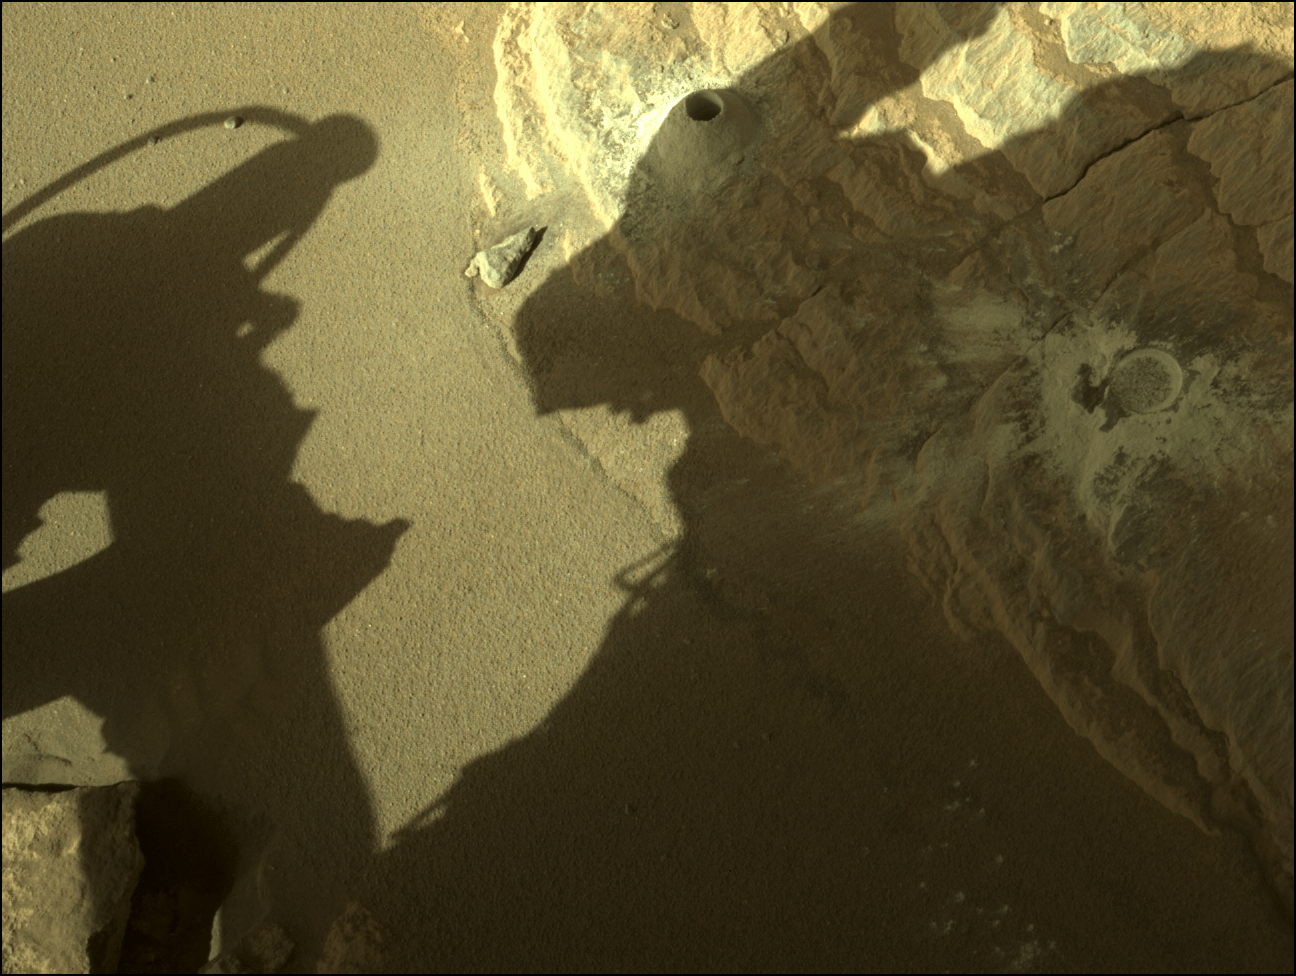 Image taken was taken by the Mars Perseverance rover after collecting the rock sample 4 at Salette.